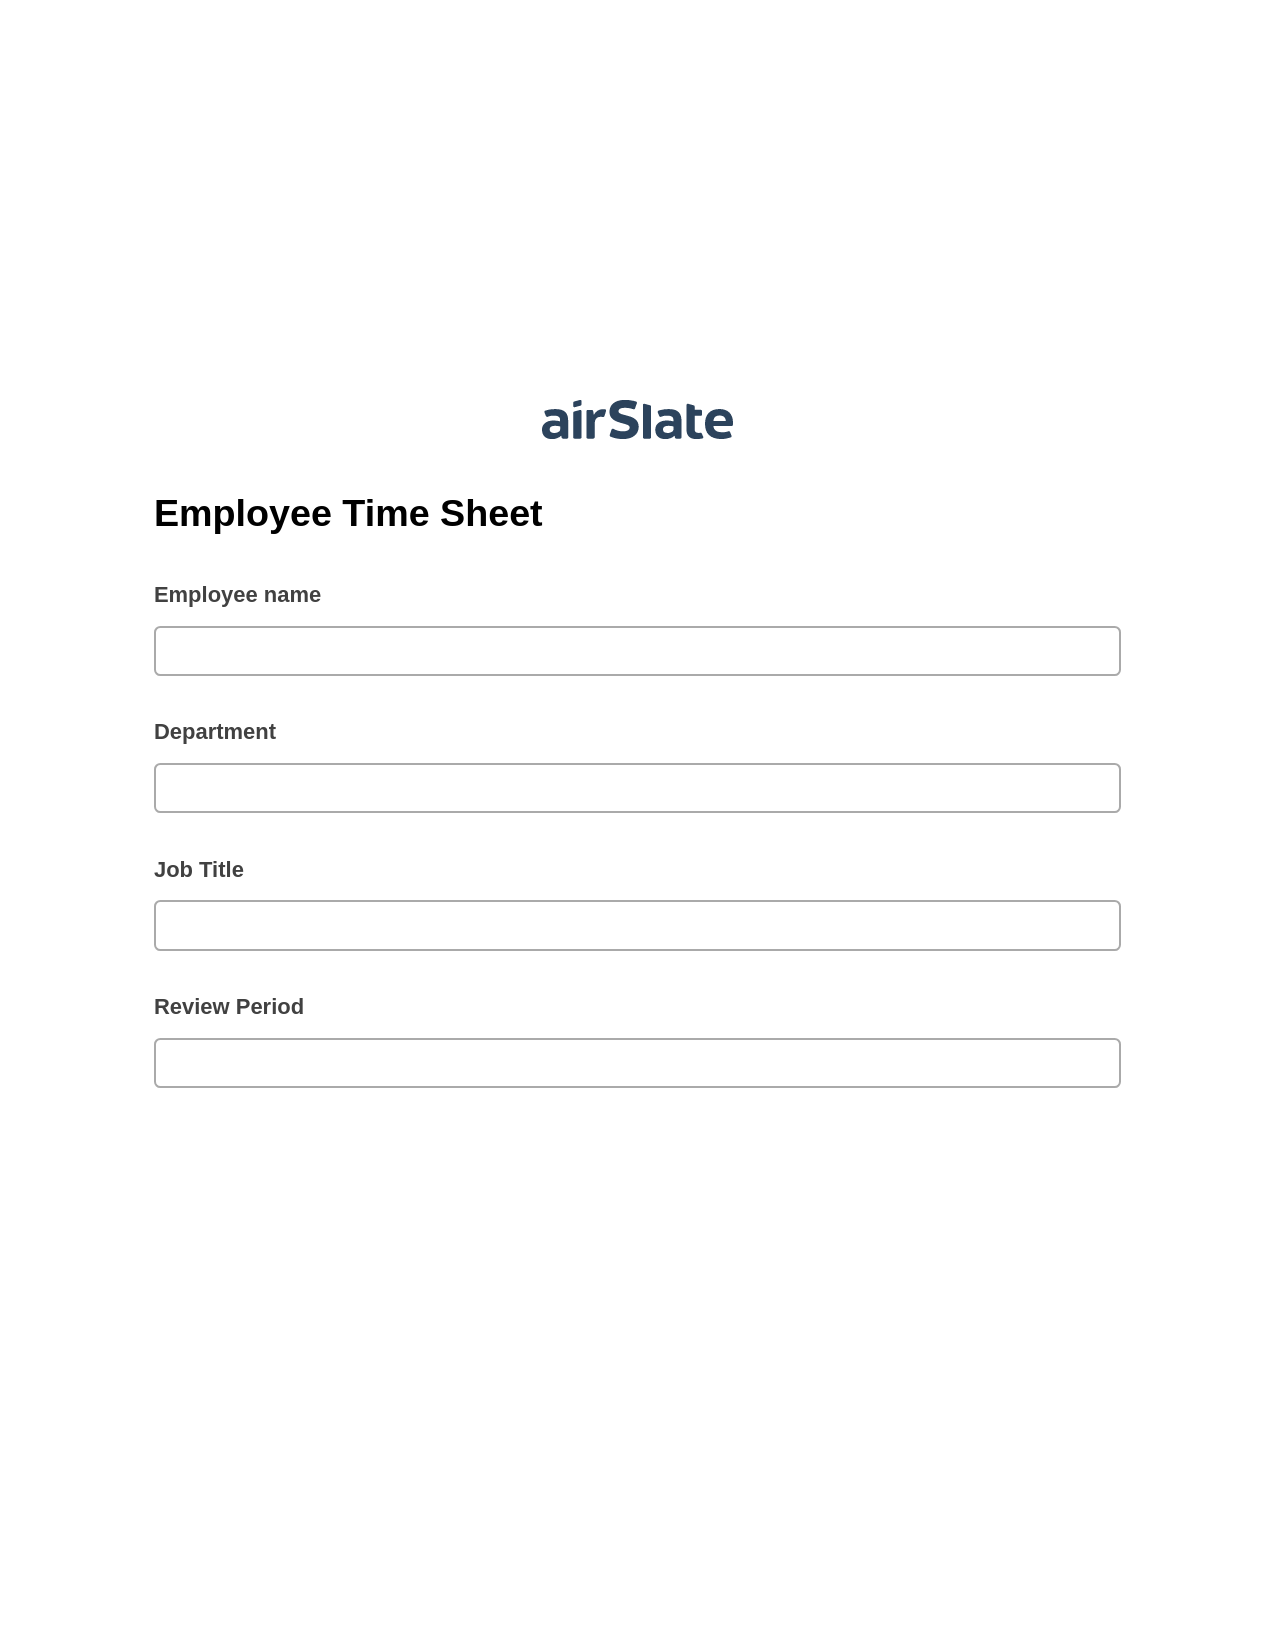 Employee Time Sheet Pre-fill from Excel Spreadsheet Bot, Text Message Notification Bot, Archive to Box Bot